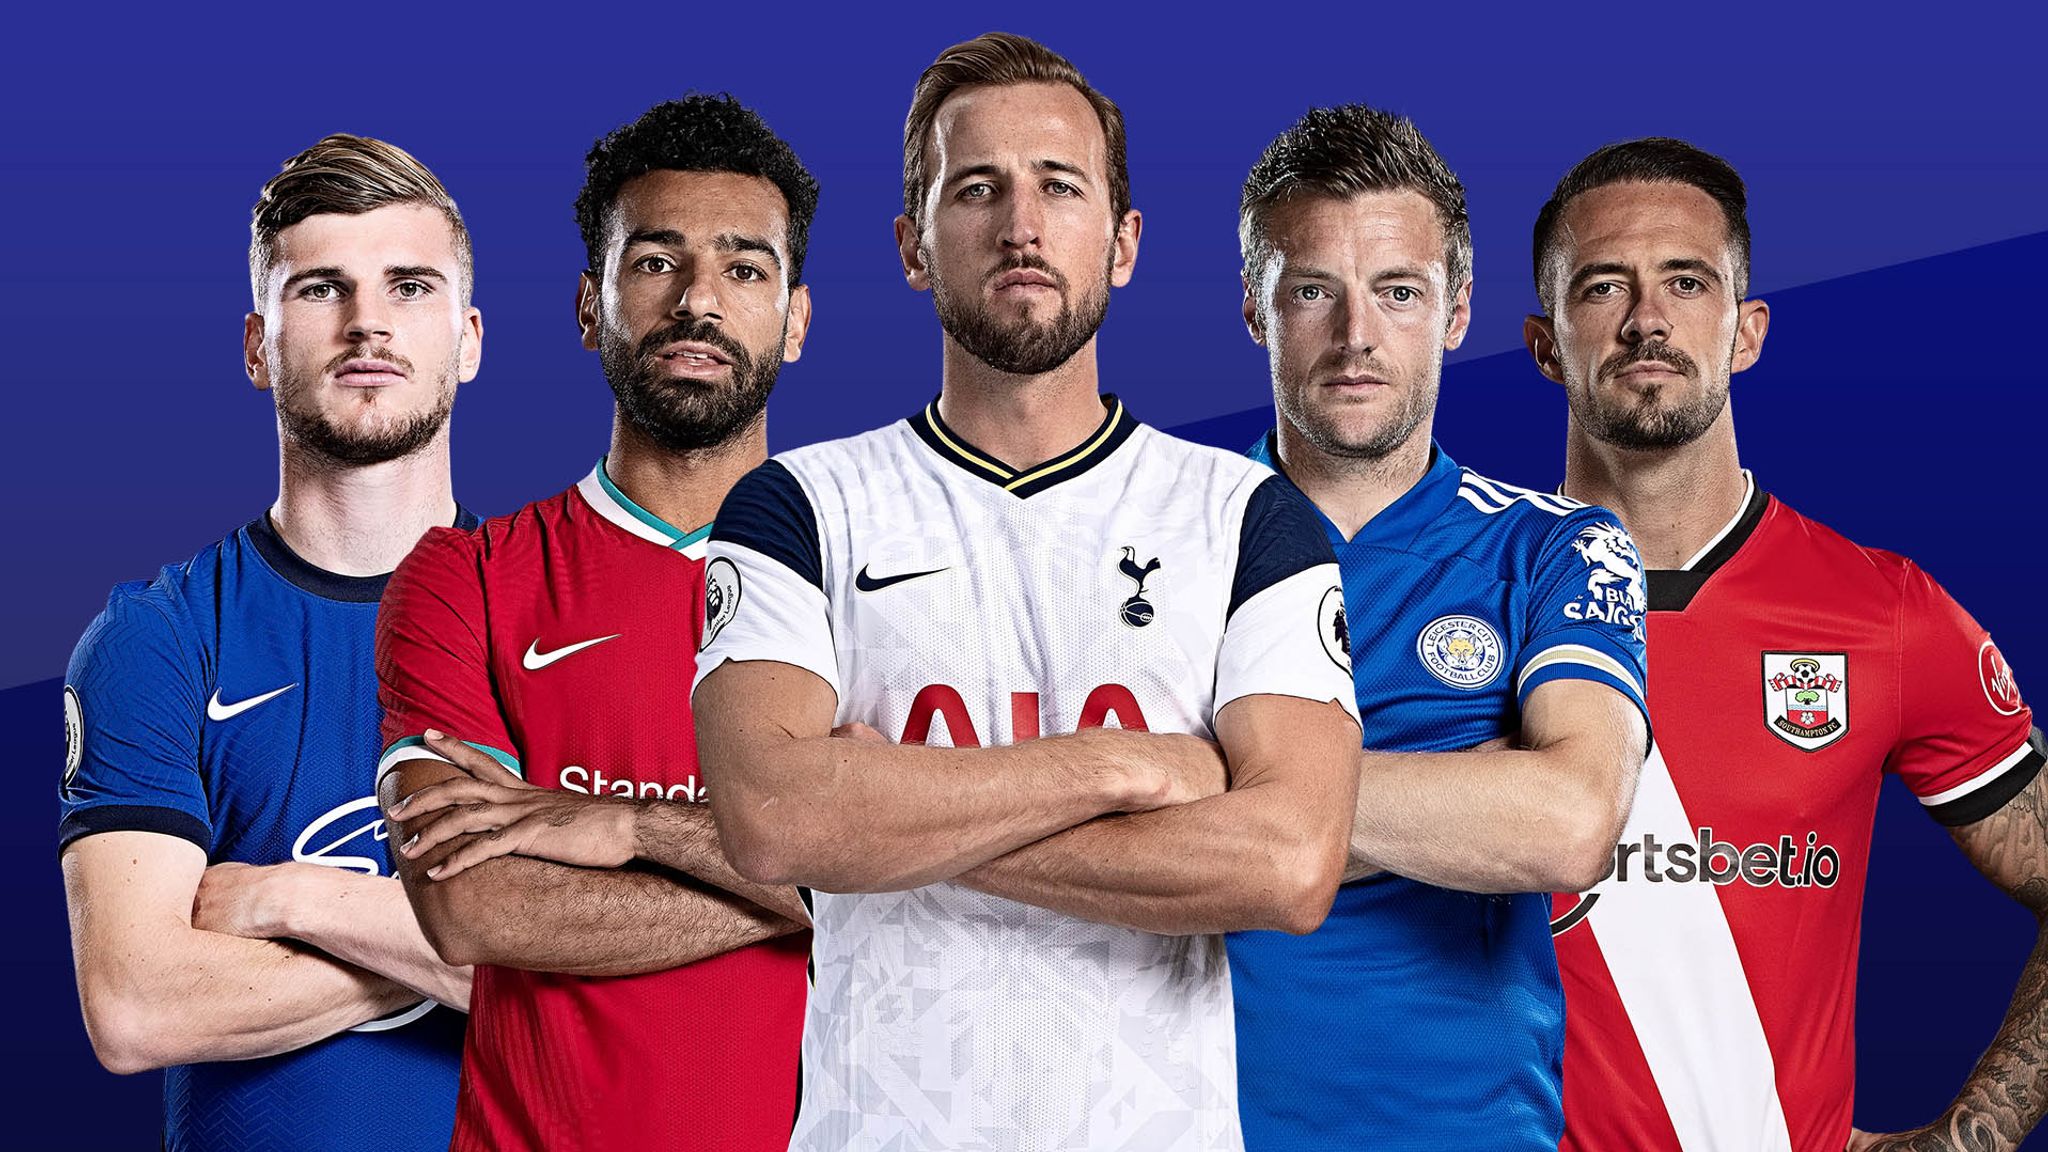 Italian players to play for Spurs in the Premier League era